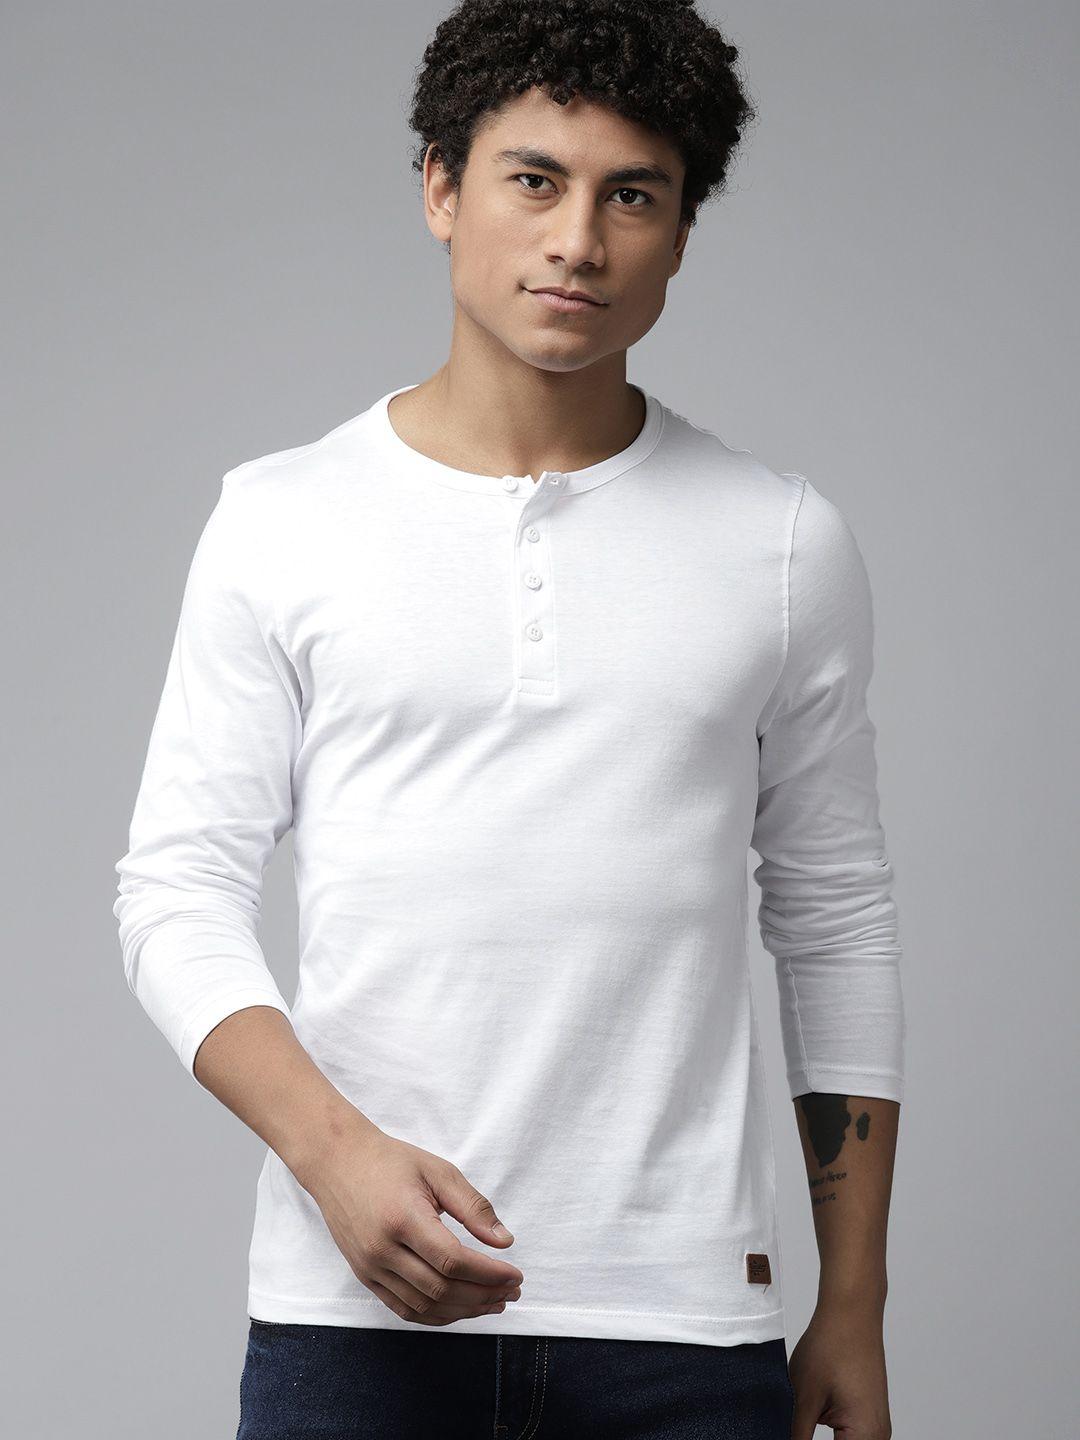 the roadster lifestyle co. henley neck pure cotton t-shirt